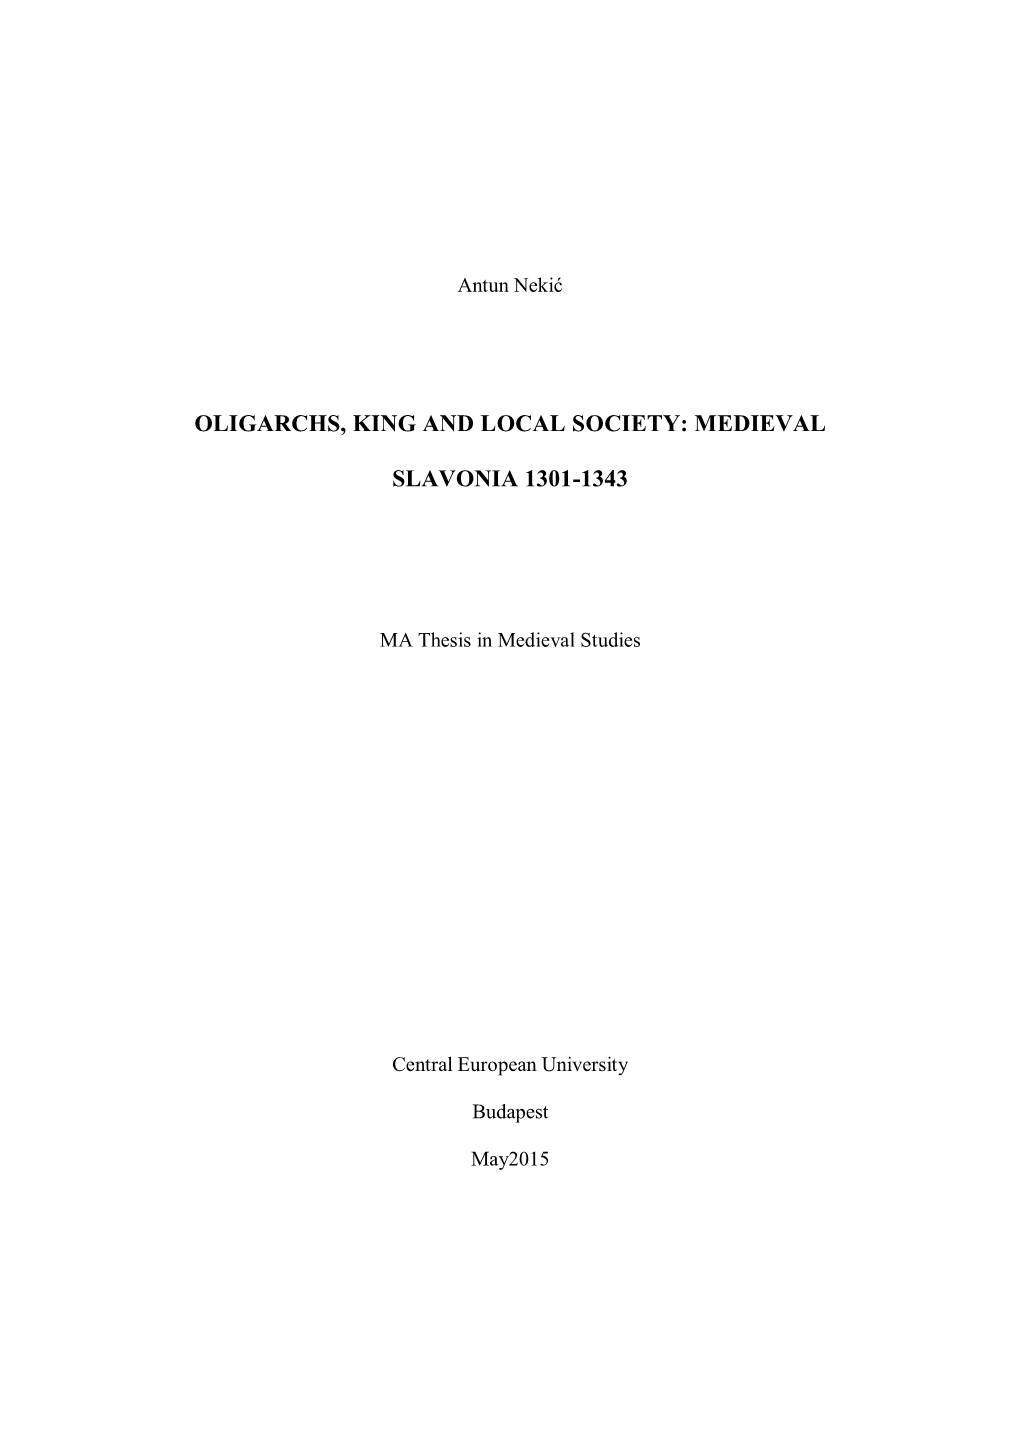 Oligarchs, King and Local Society: Medieval Slavonia